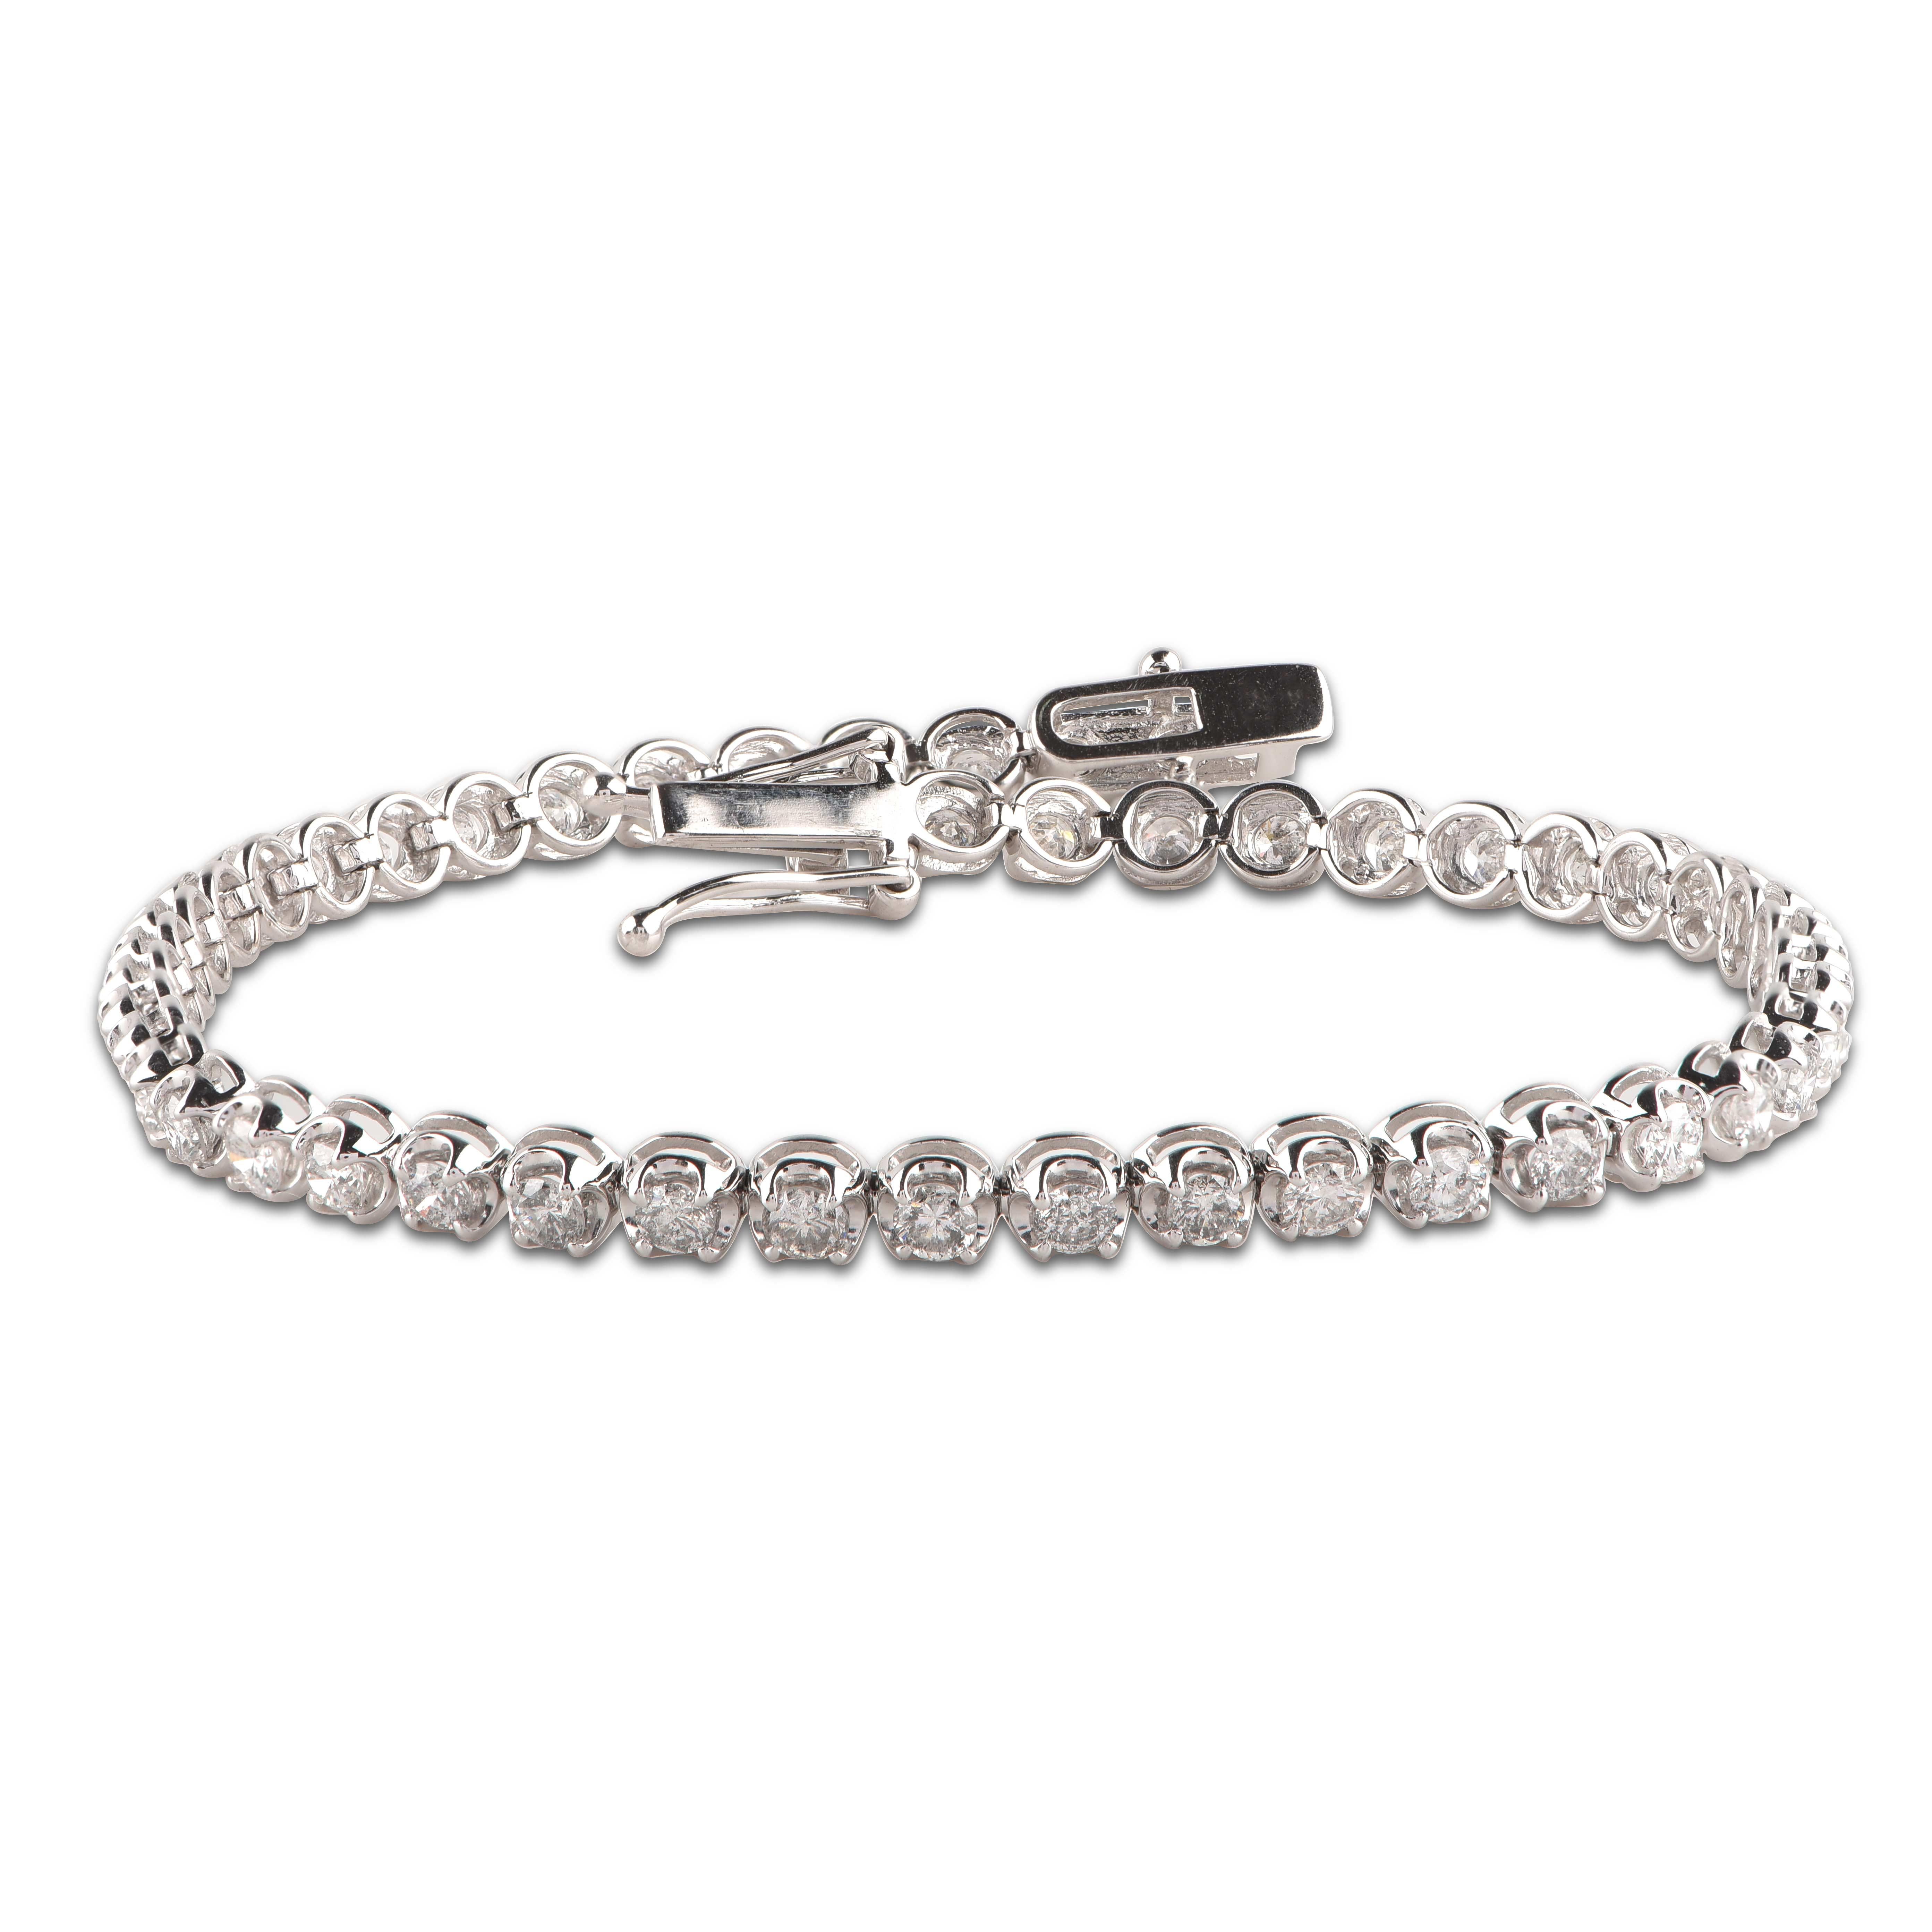 Beautifully shimmering, this diamond tennis bracelet makes any day special. This shimmering design features 41 round brilliant-cut diamond set in prong setting and crafted in 14 karat white gold. The total weight of diamond is 5.00 carat and it